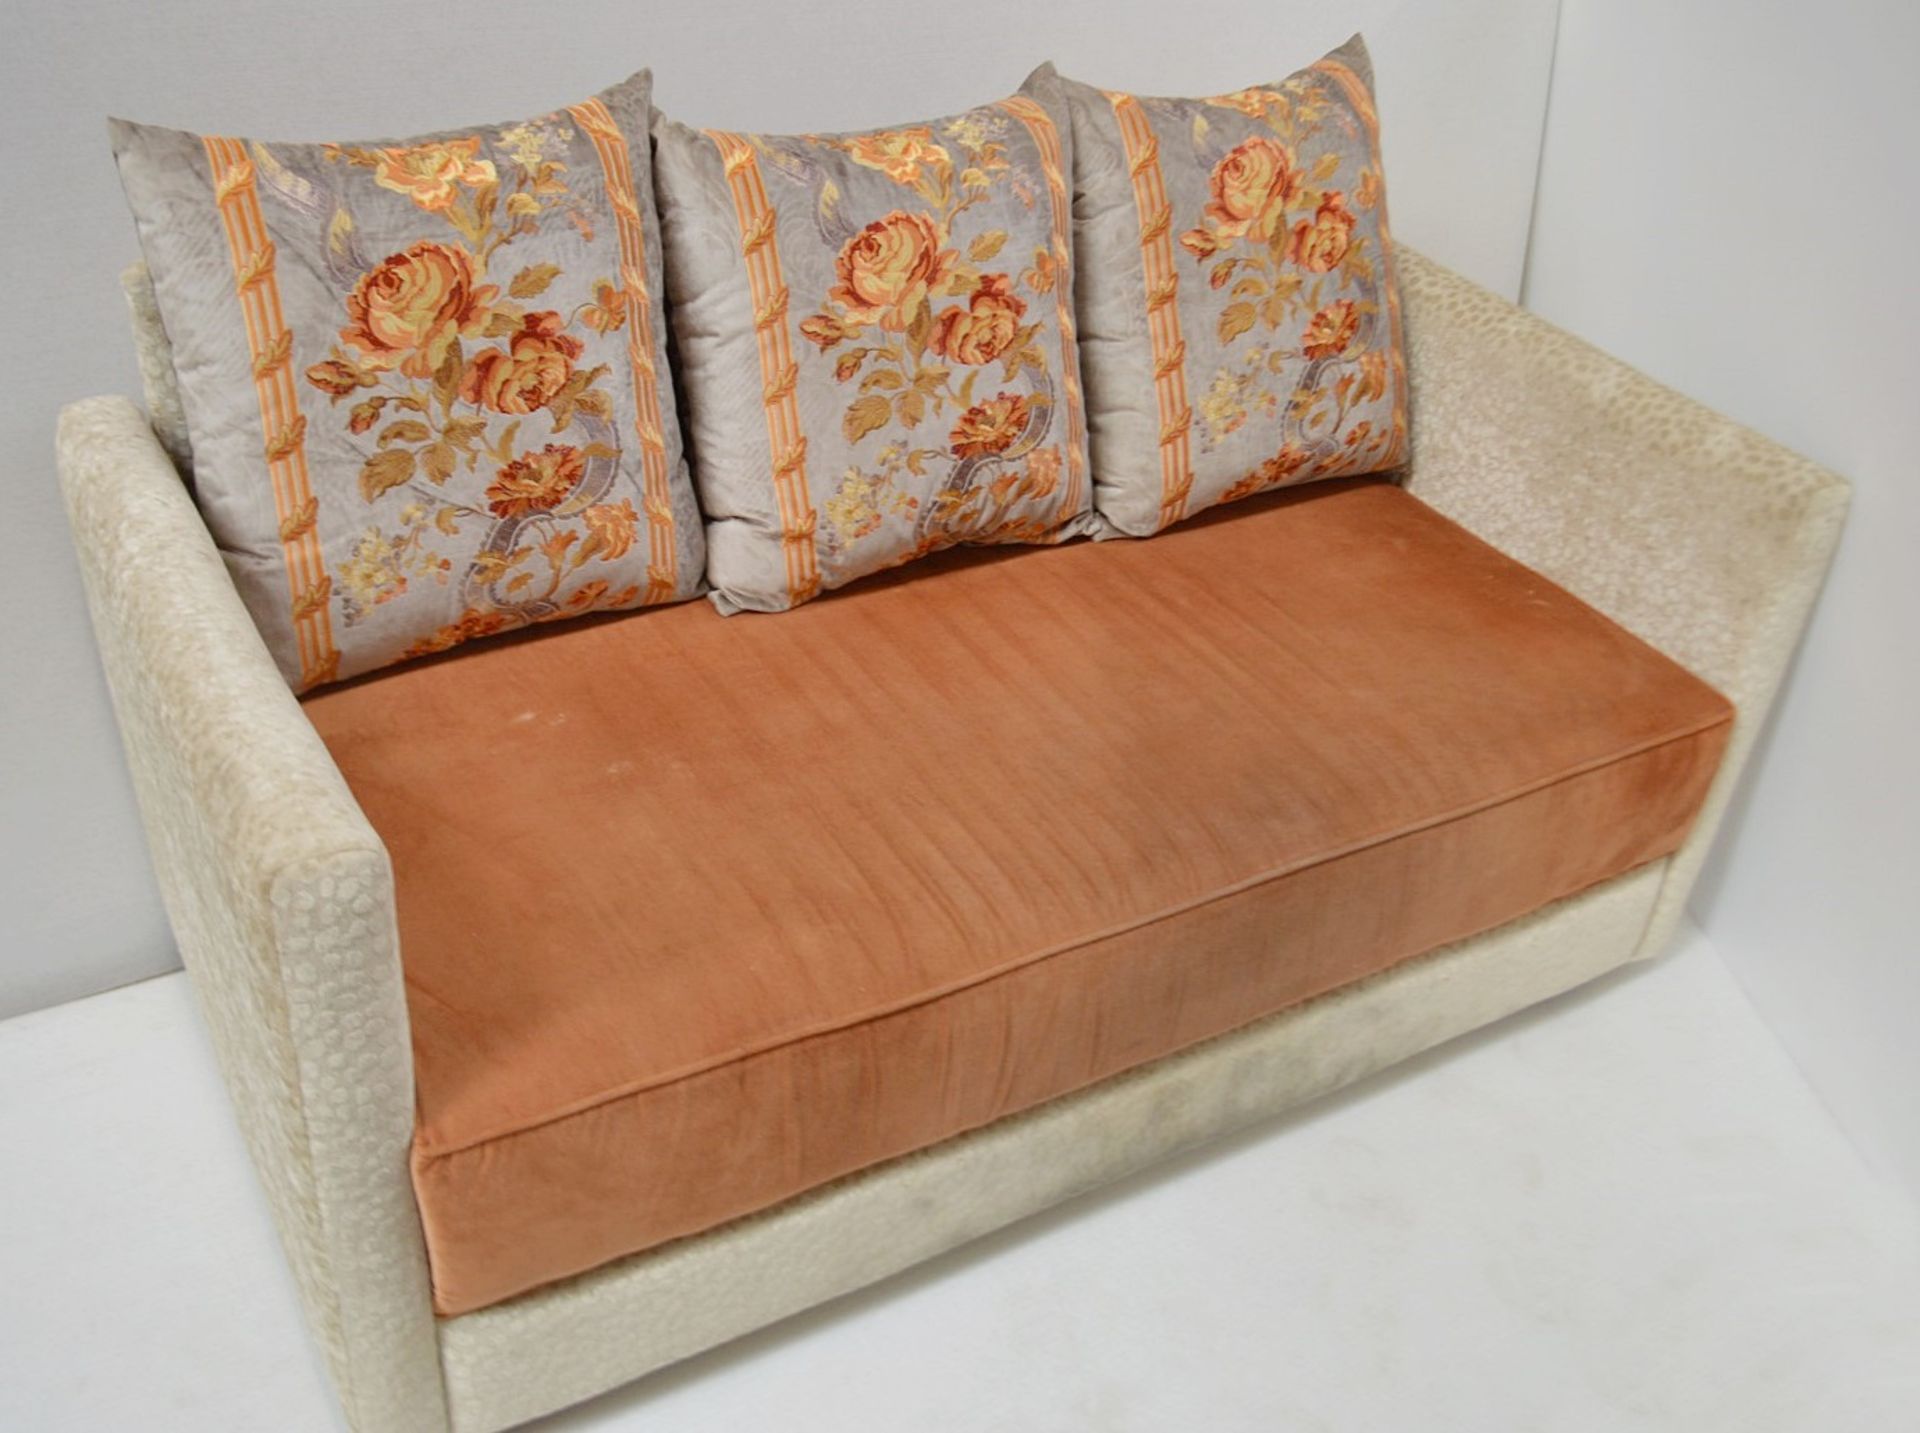 1 x Upholstered Sofa With A Selection Of Cushions - Dimensions: W181 x D77 x H70cm / Seat 39cm - Image 4 of 8